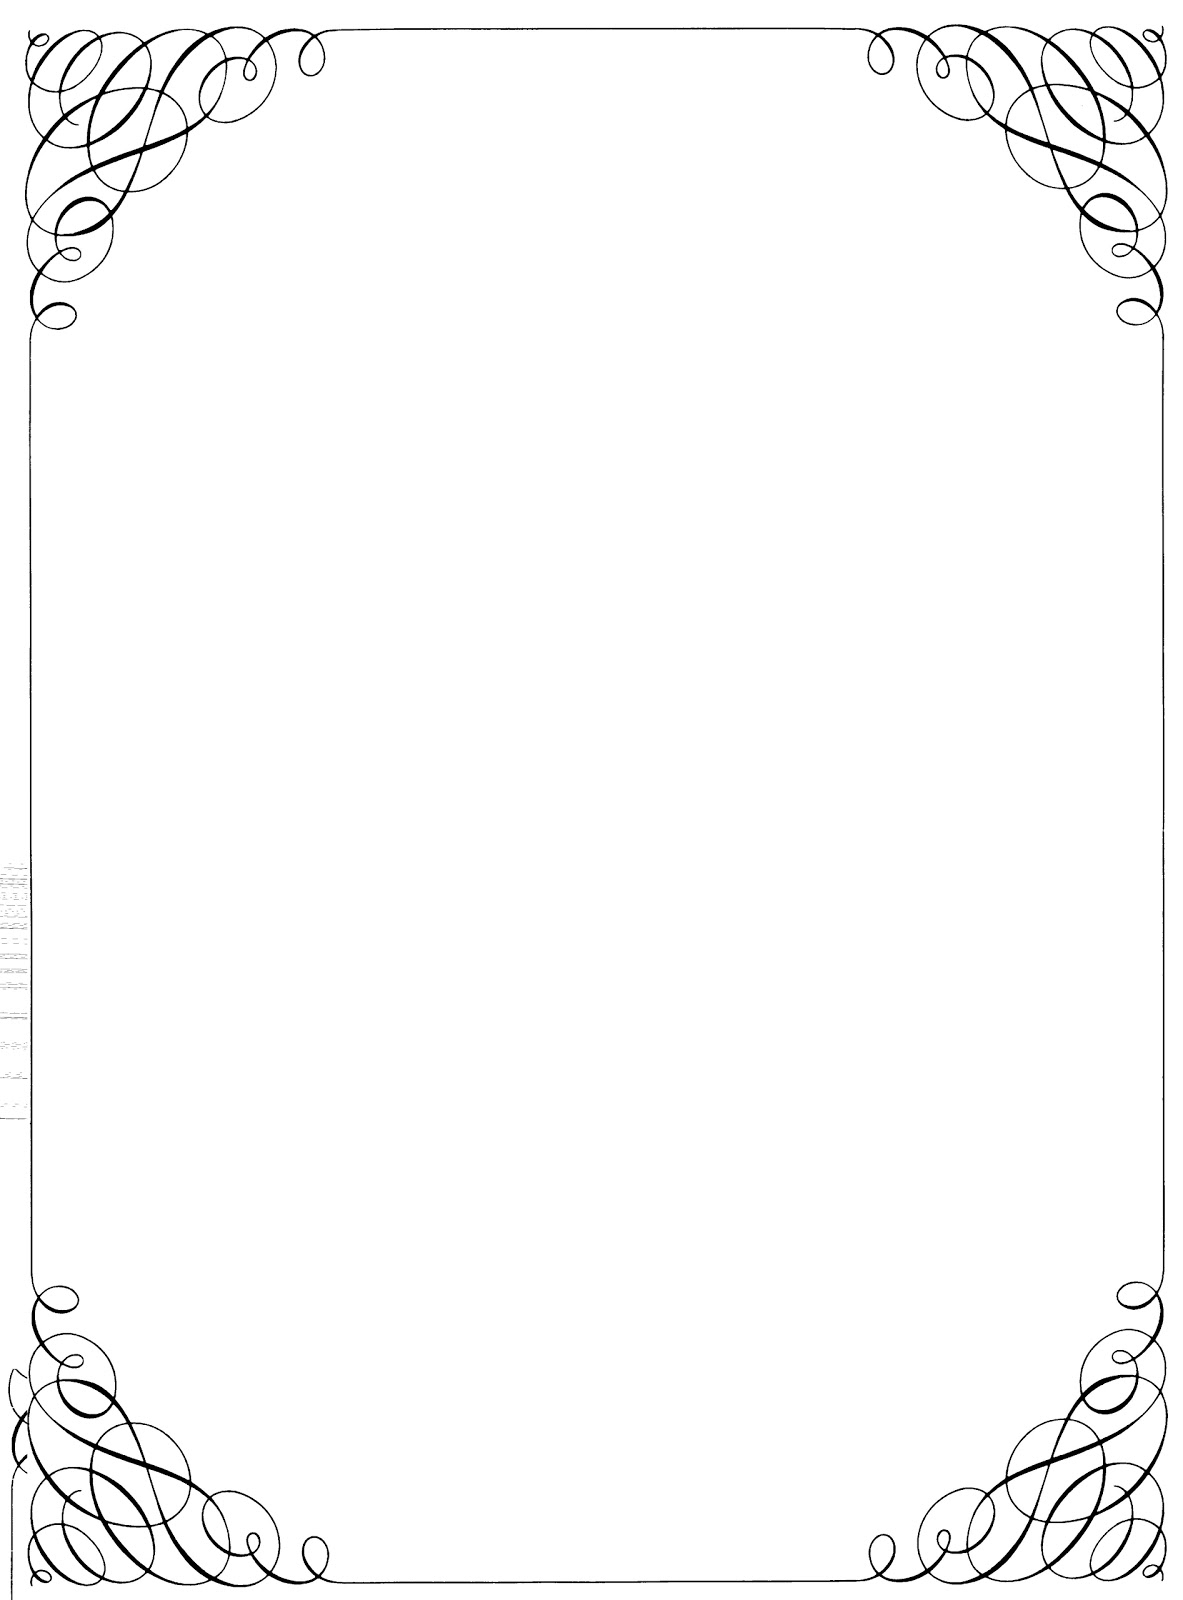 free clip art borders and frames downloads - photo #9